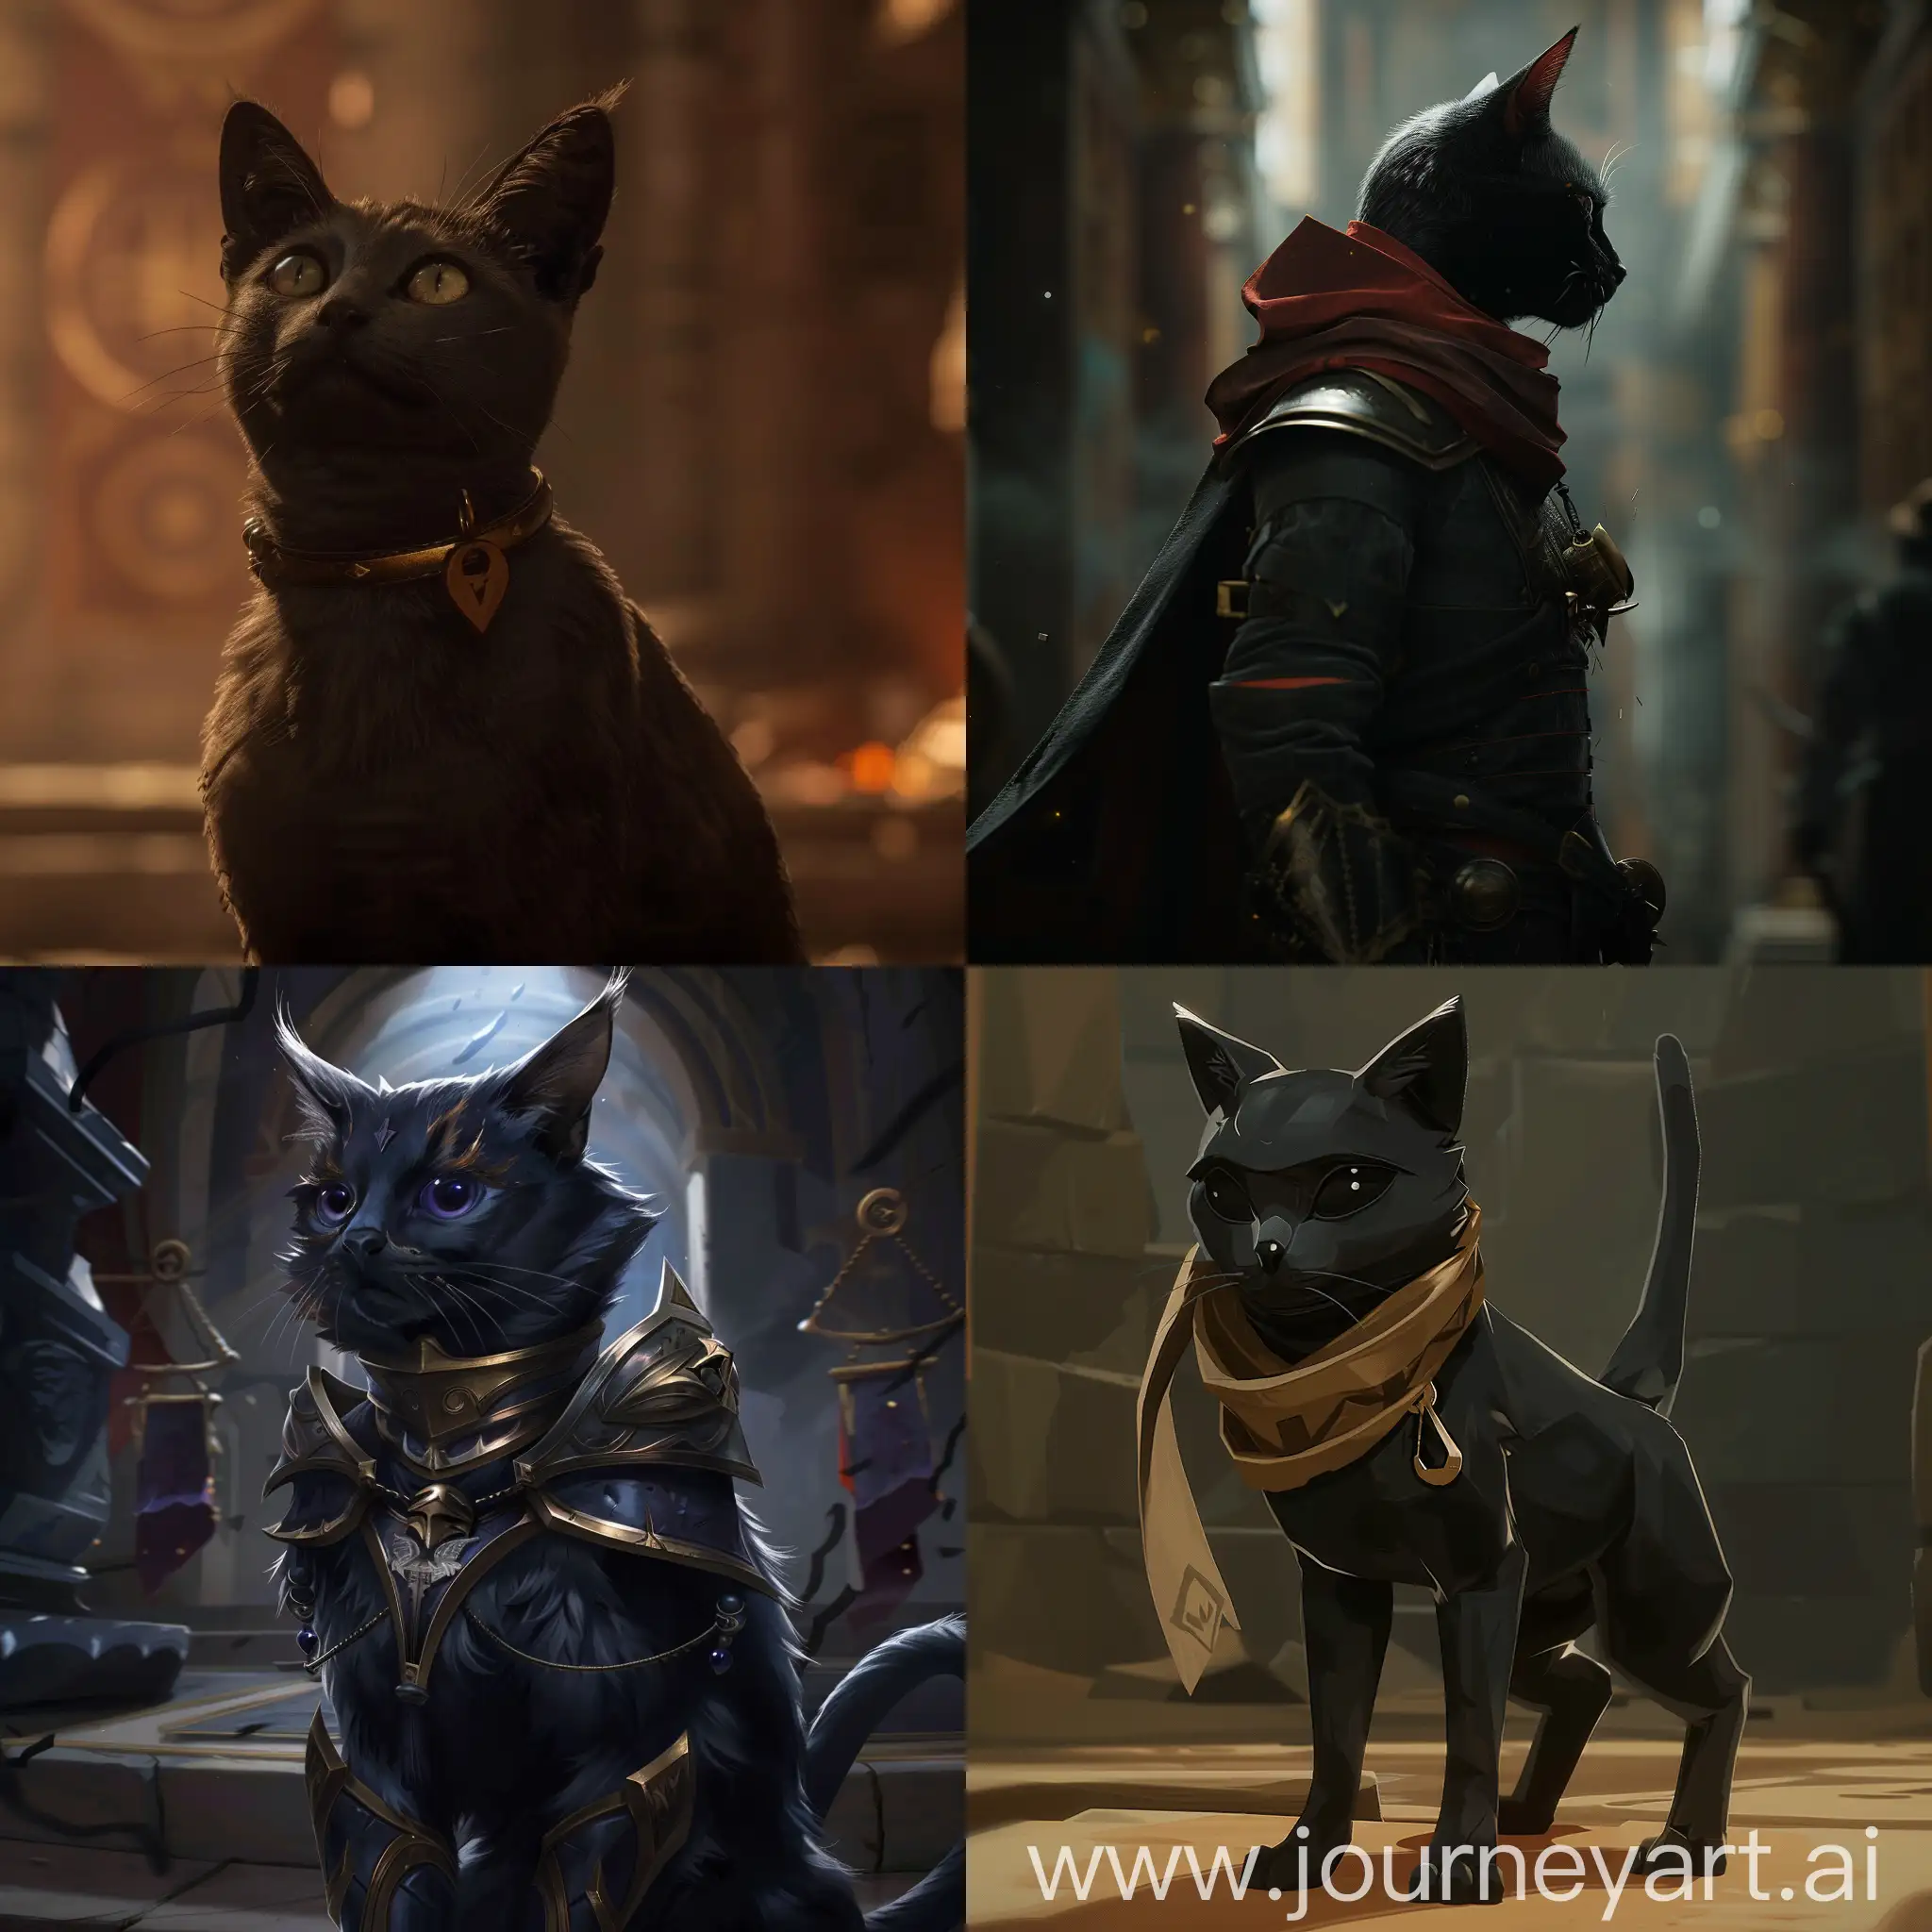 Omen from the game valorant produced by riot games as a black cat.
